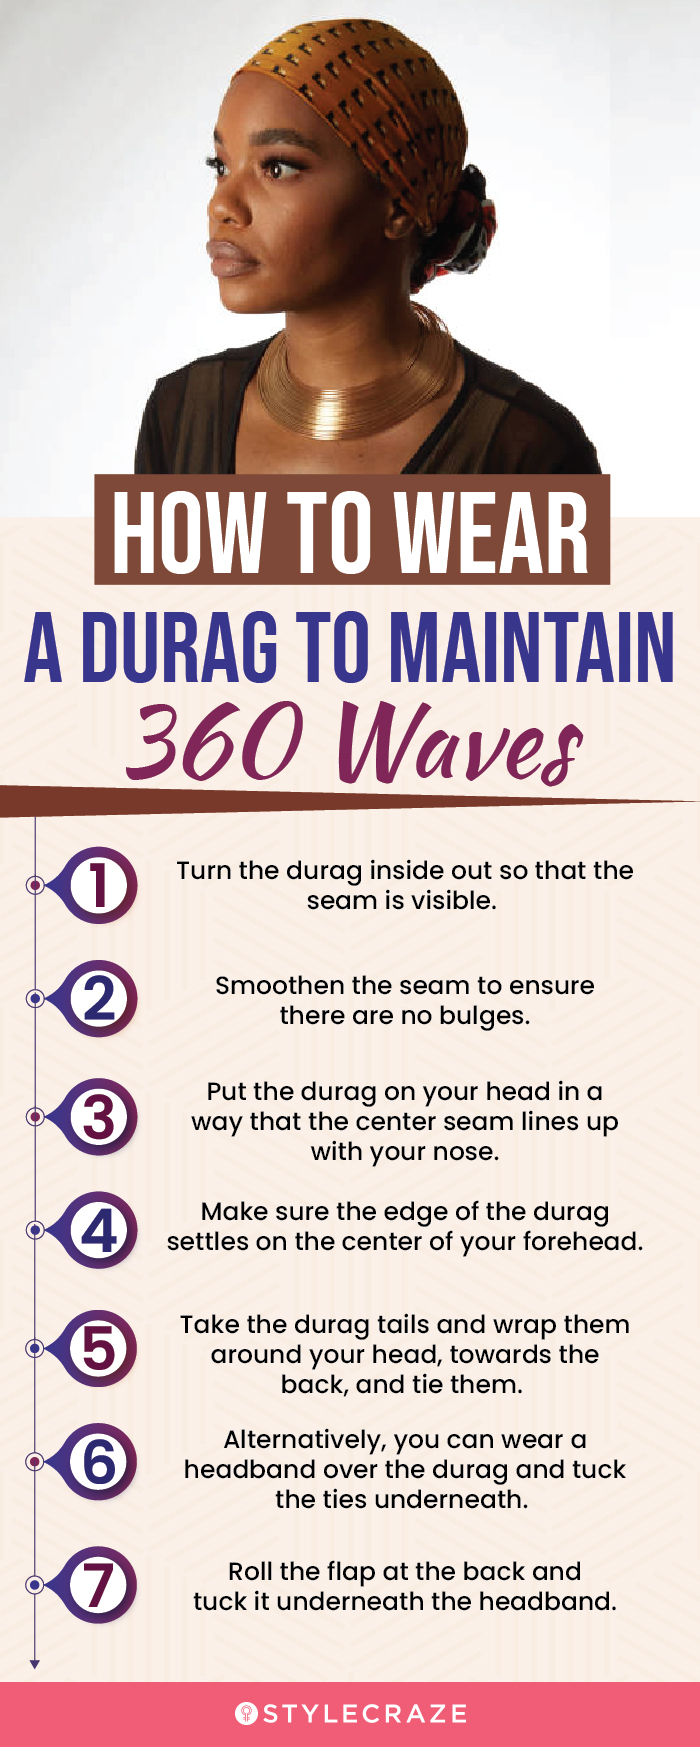 how to wear a durag to maintain 360 waves (infographic)